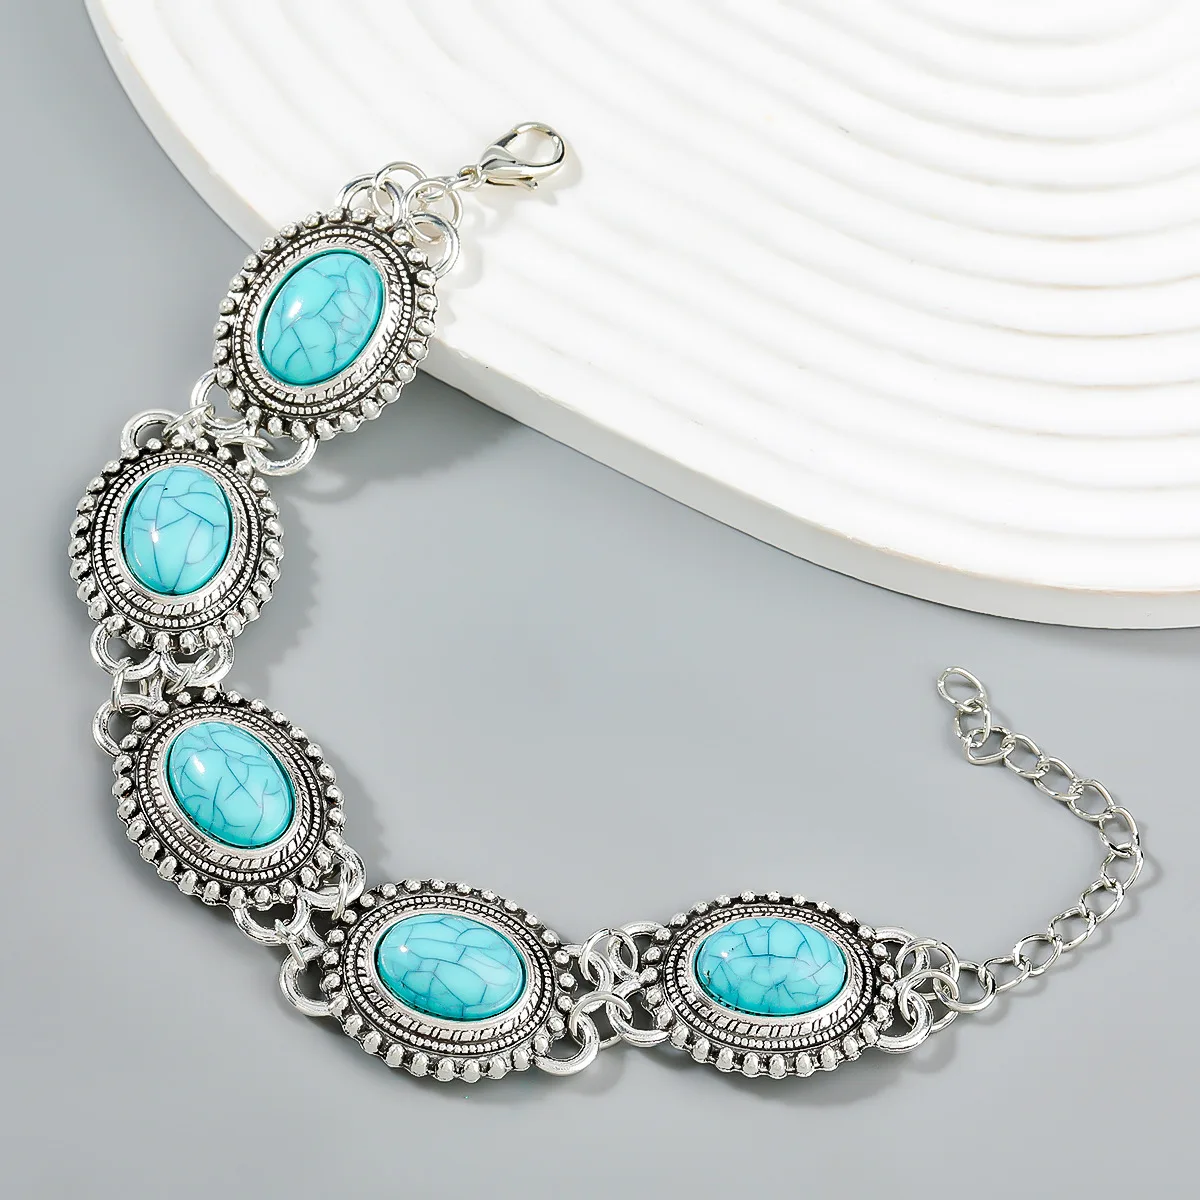 

Women Hiphop Bohemian Style Summer Bracelet Natural Turquoise Oval Shape Stone Statement Bangles For Women